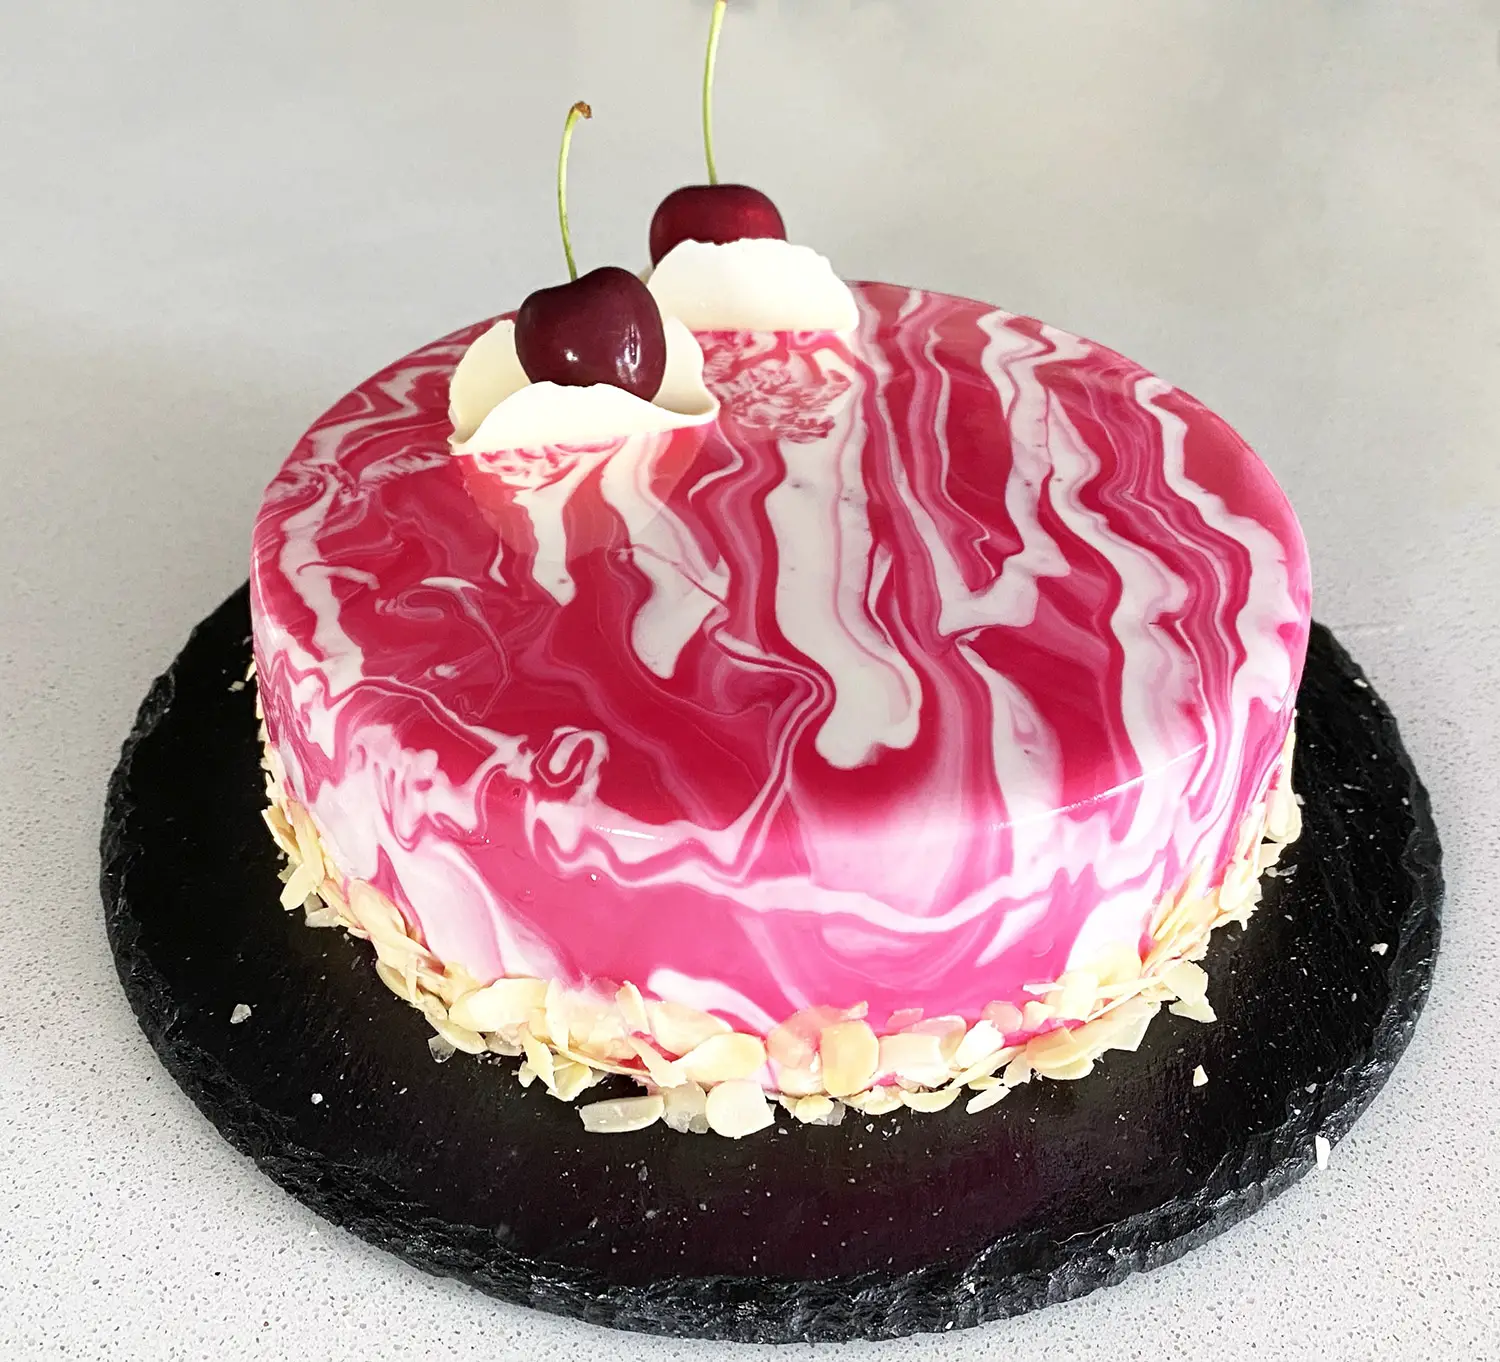 FRESH CHERRY AND CHOCOLATE MOUSSE CAKE RECIPE